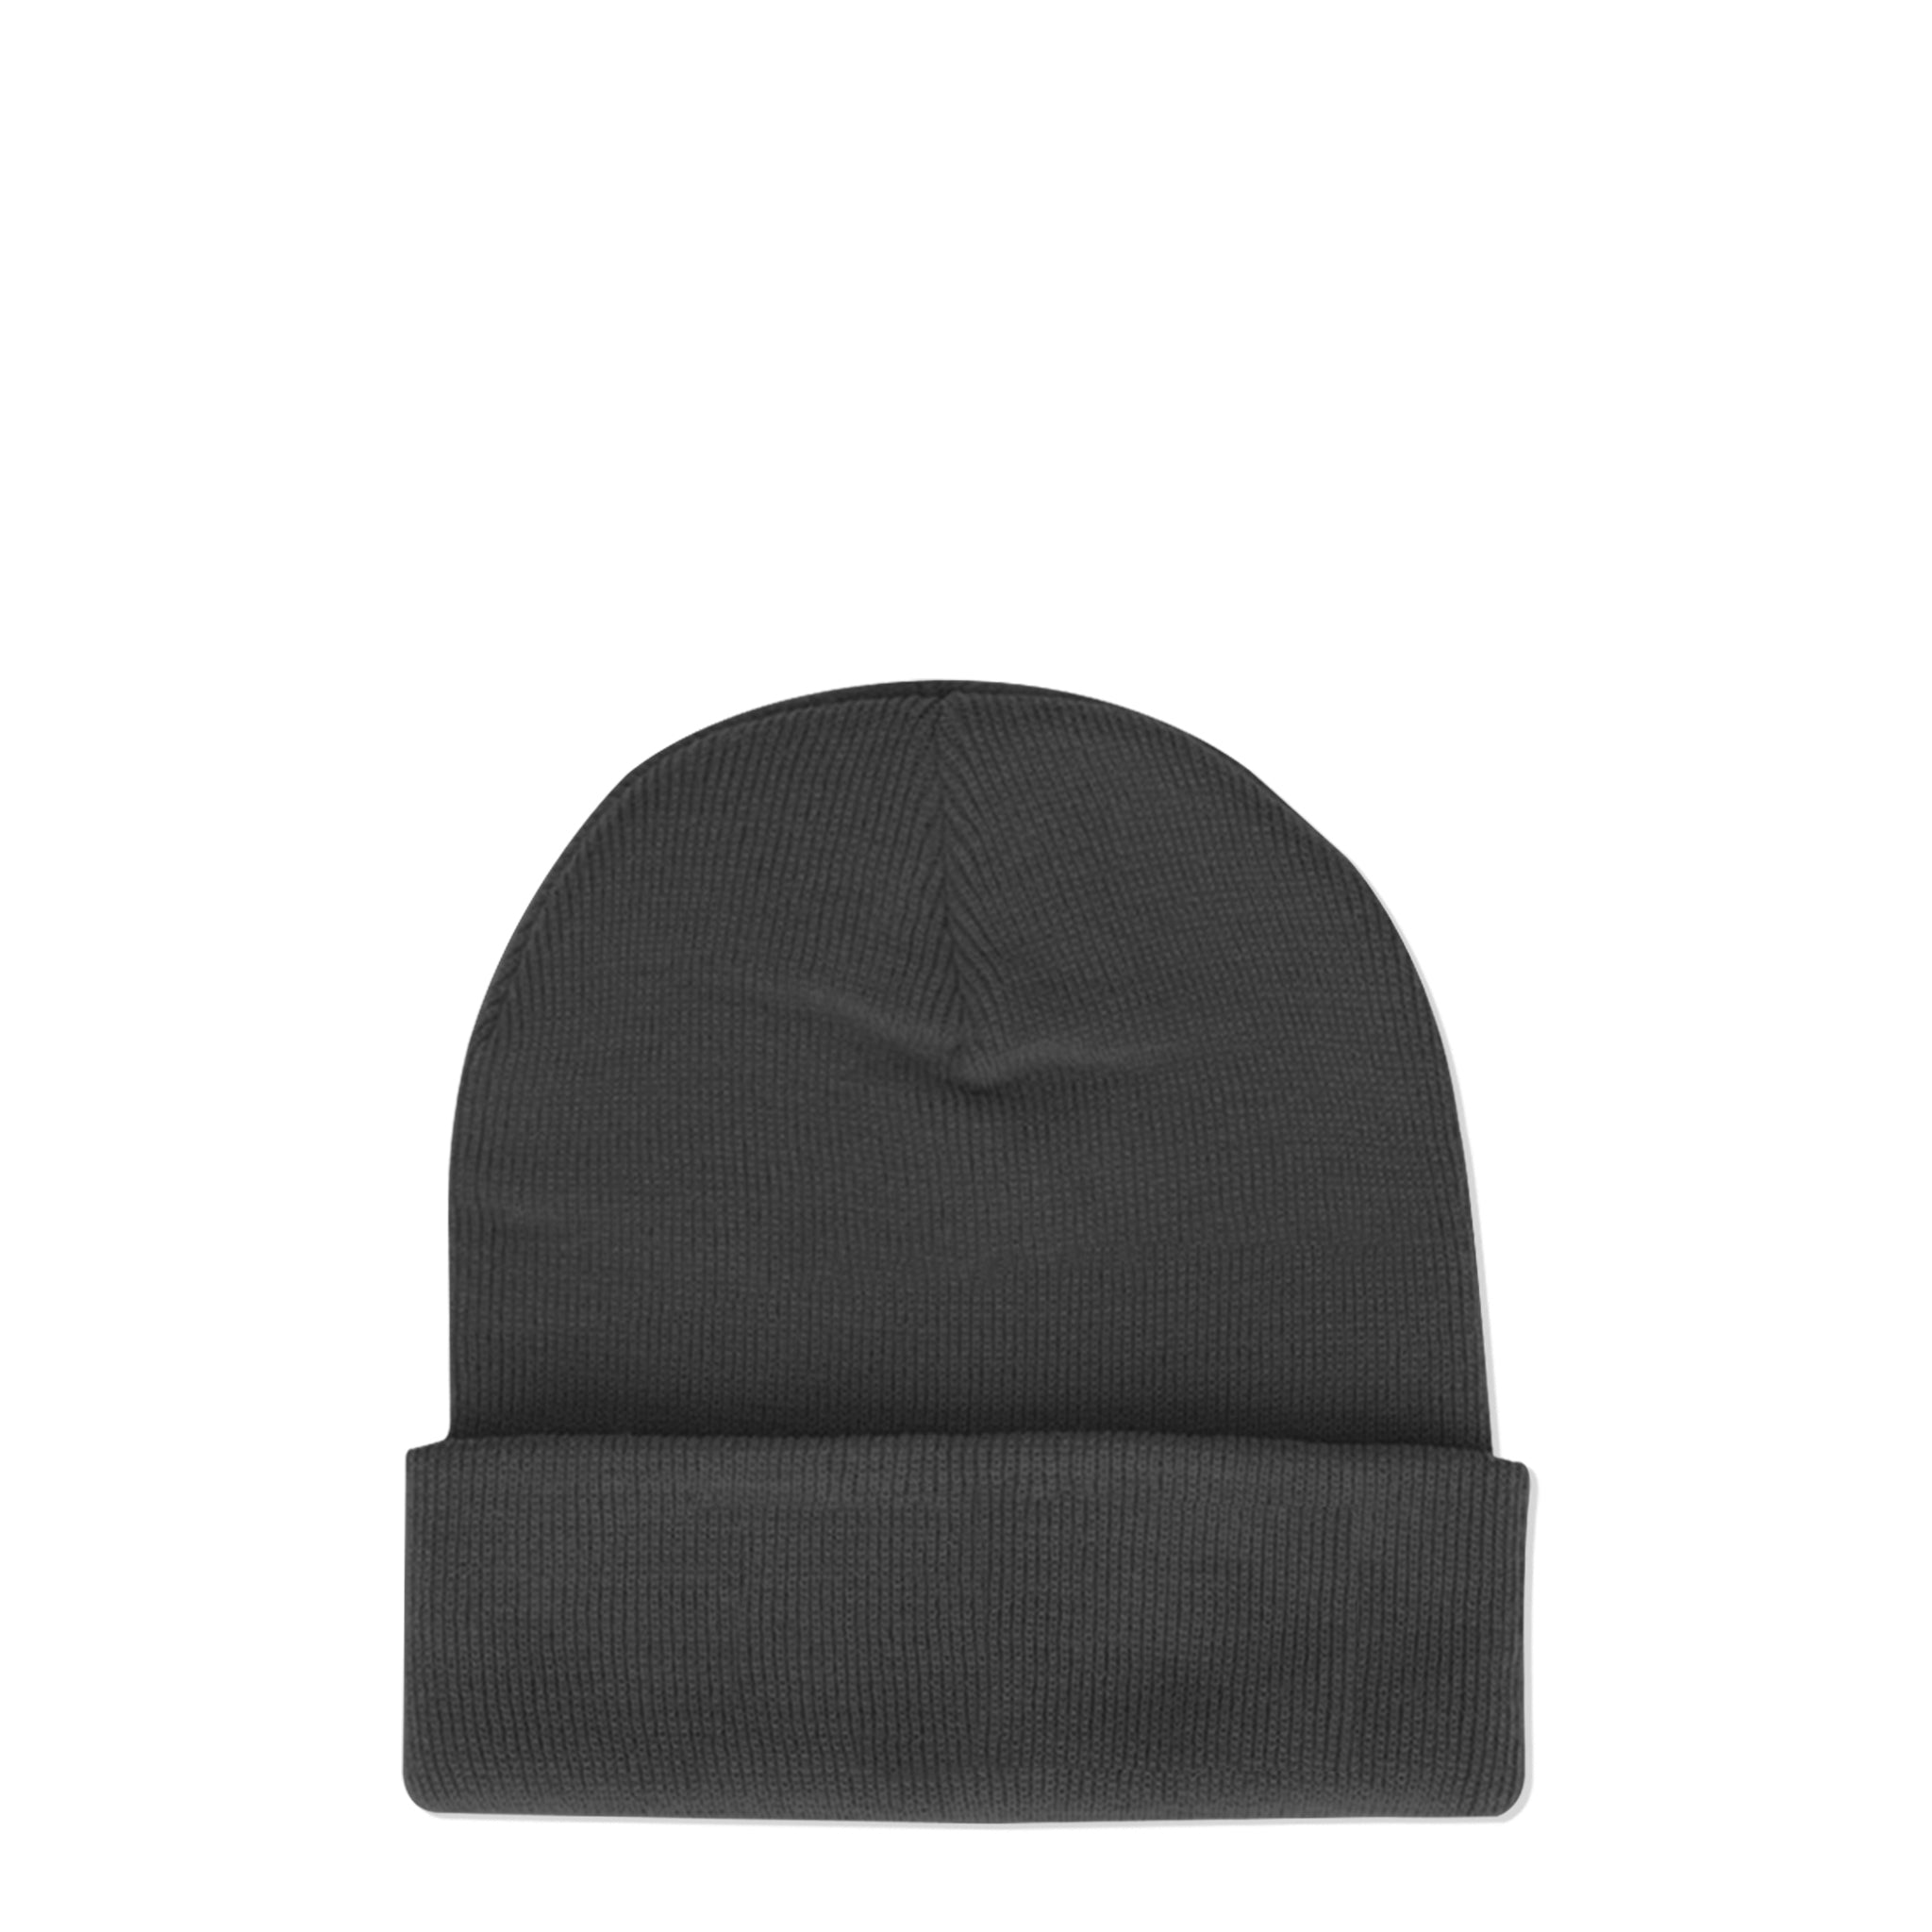 Two Swallows Beanie – Charcoal